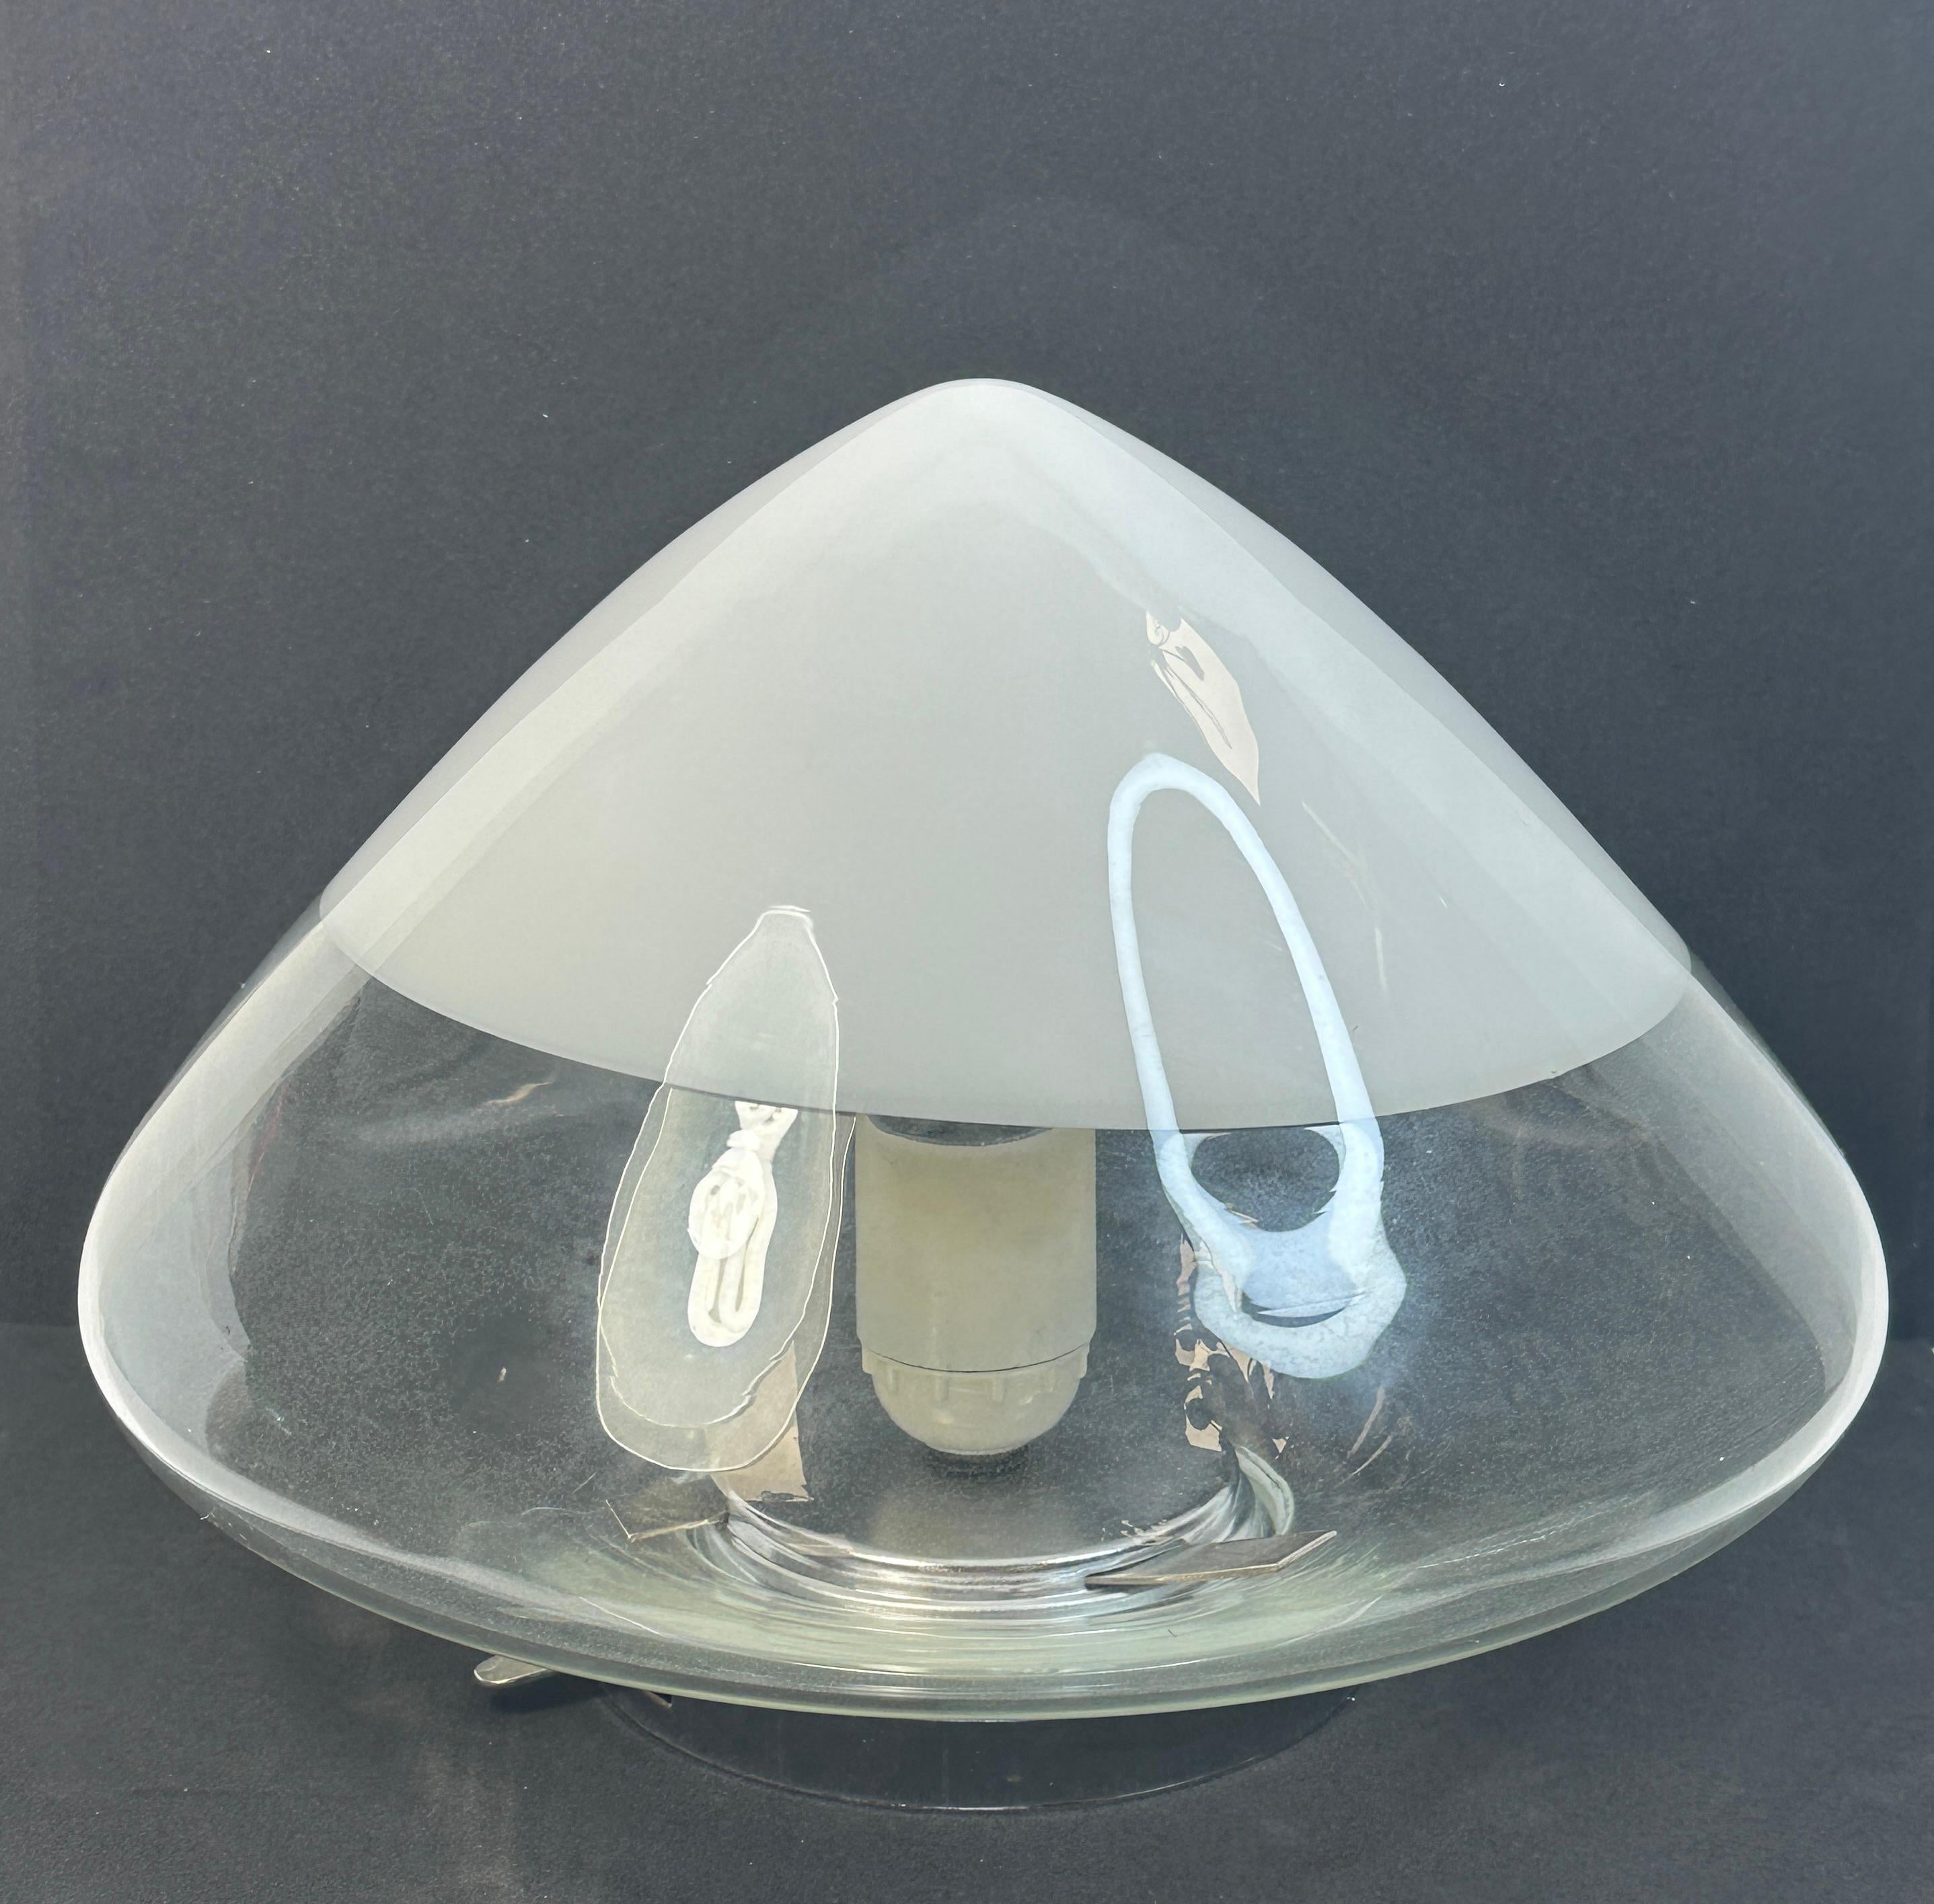 A beautiful Murano glass flush mount. Made in Italy in the 1970s. Gorgeous textured glass flush mount with metal fixture. The Fixture requires an European E27 / 110 Volt Edison bulb, up to 100 watt. A nice addition to any room, probably looks great